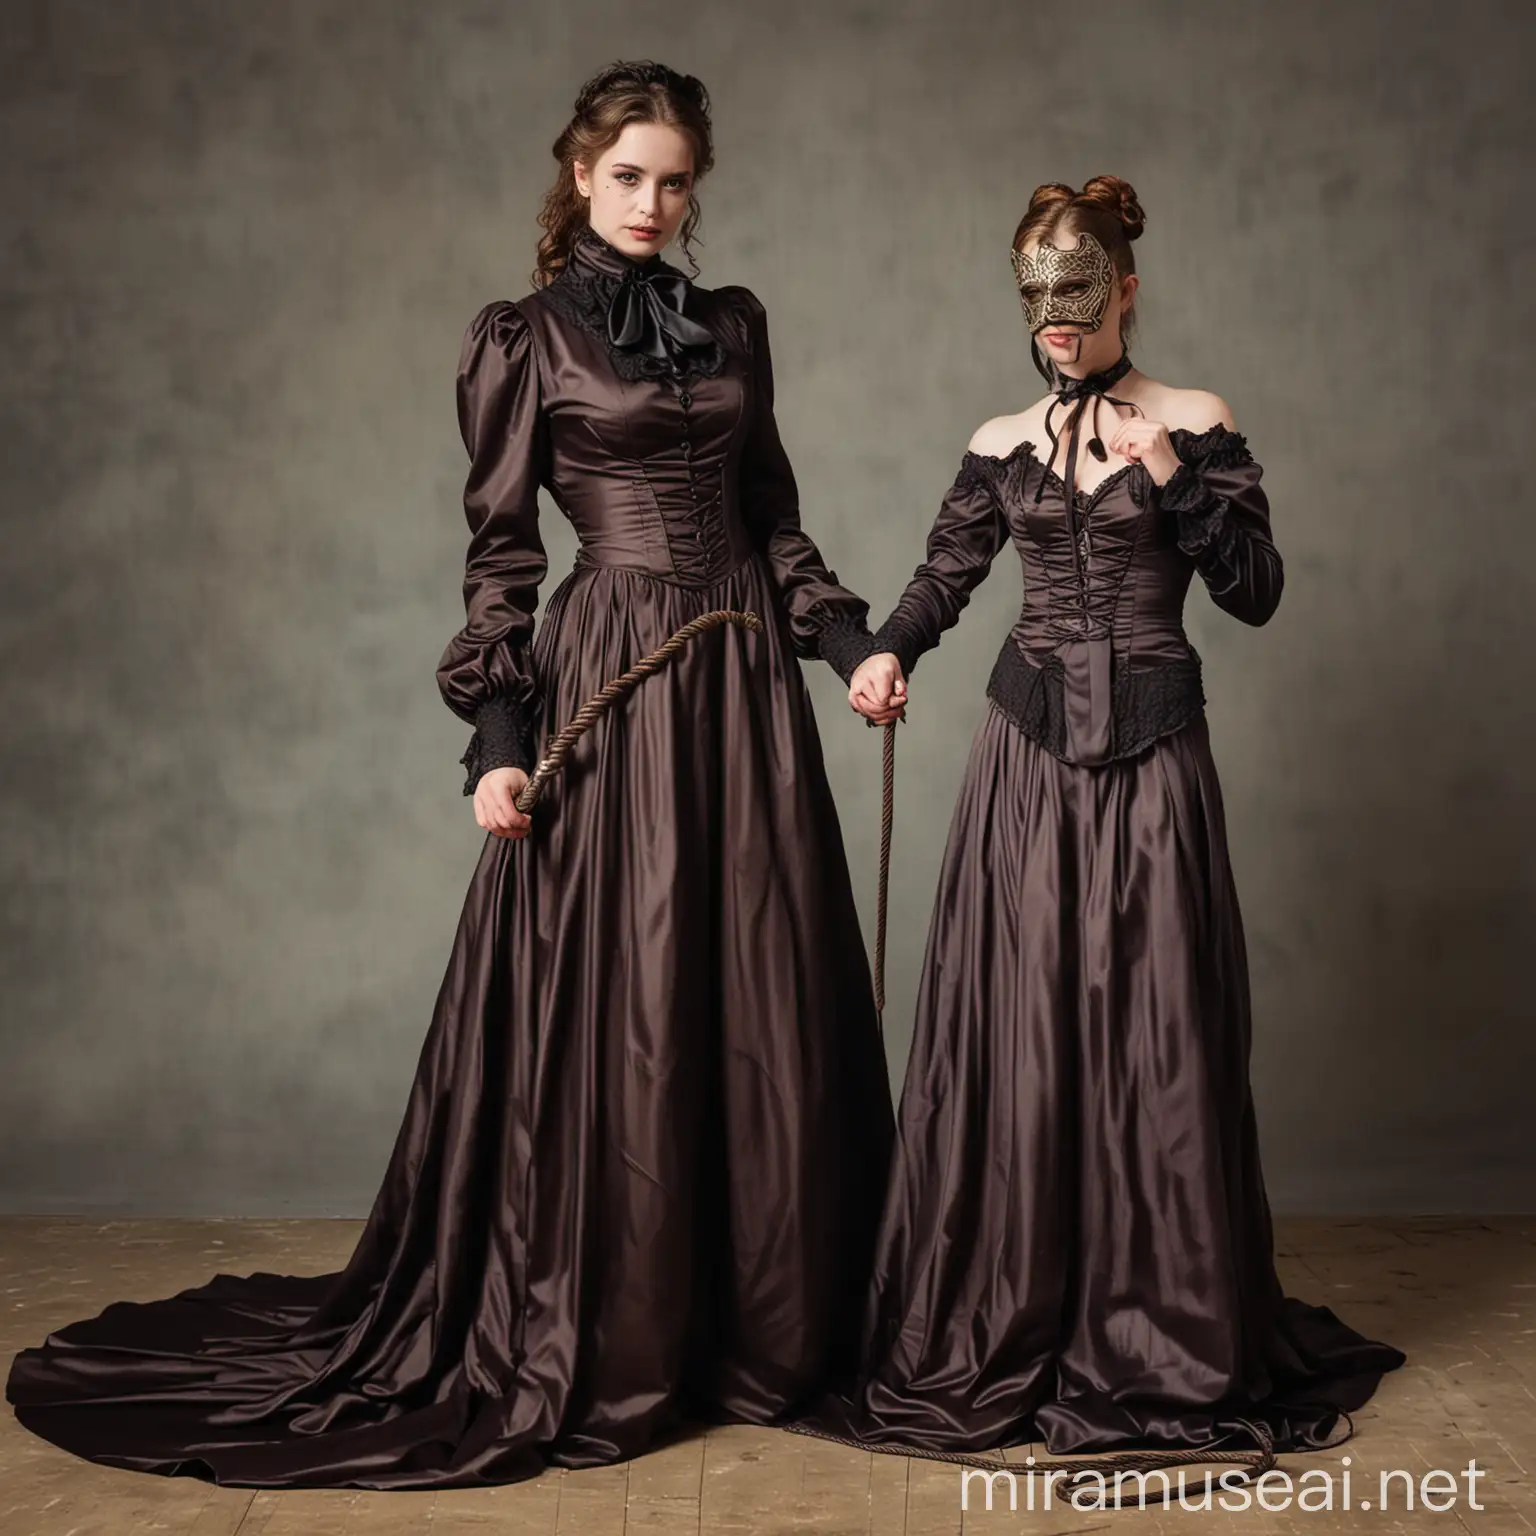 Victorian Women in Satin Dresses with Horsewhip and Mask